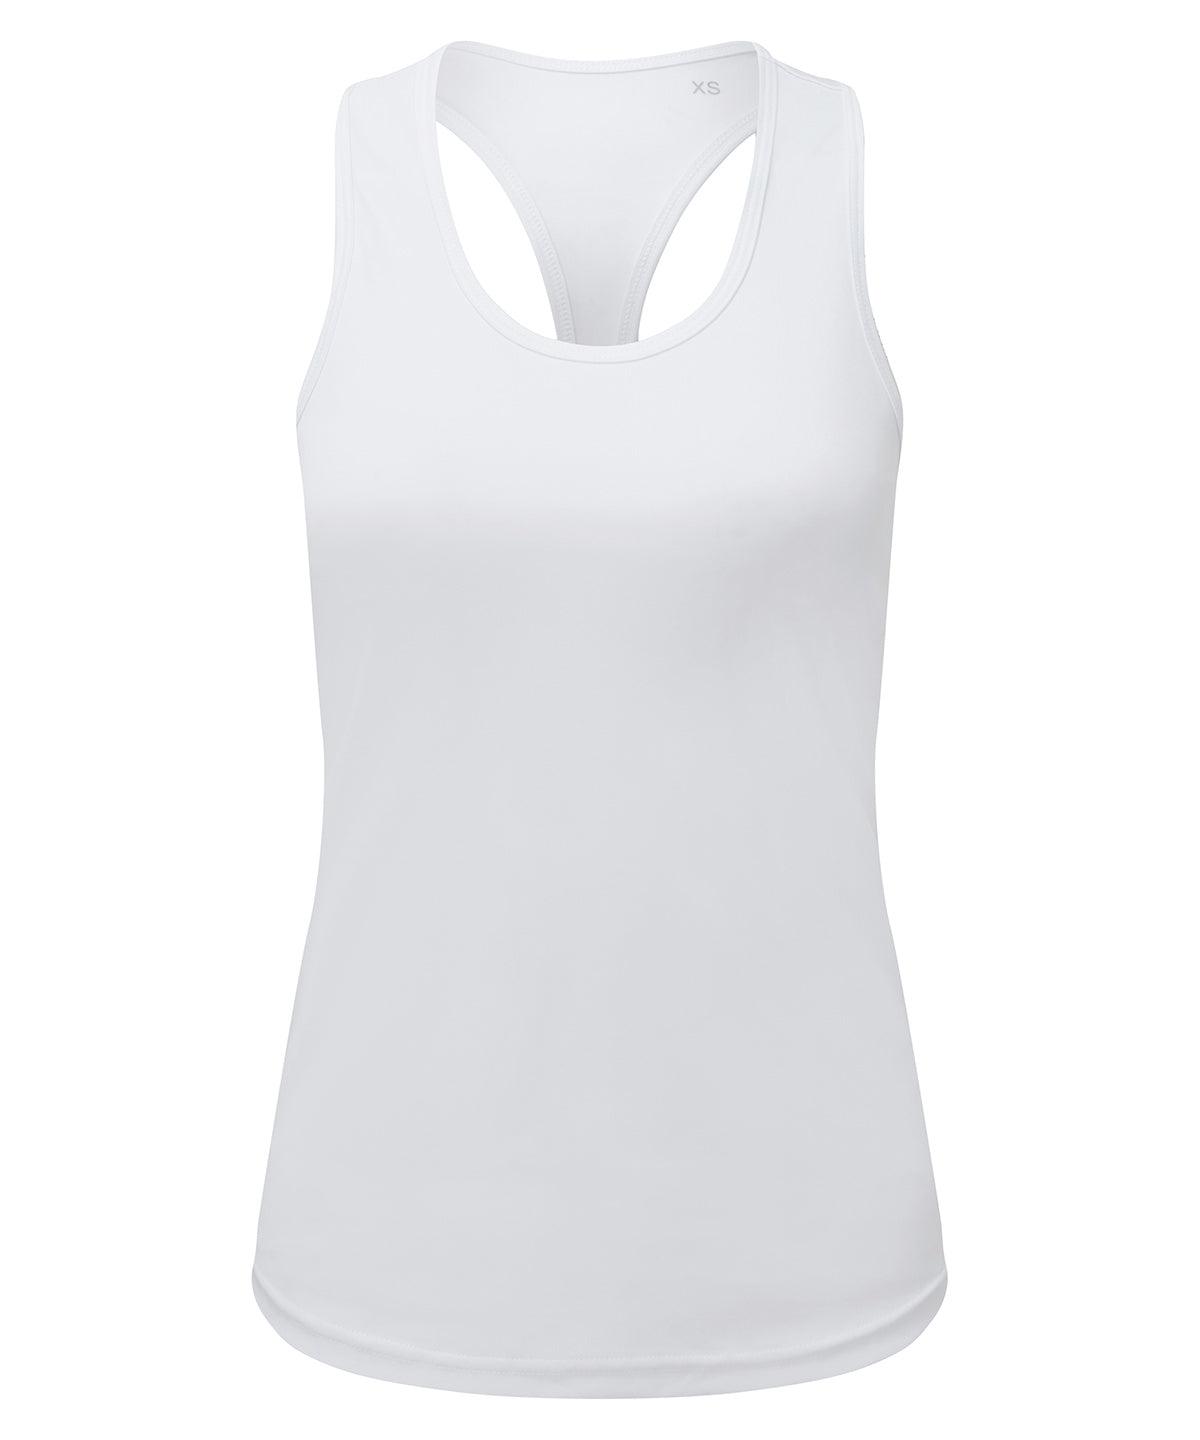 White - Women’s TriDri® recycled performance slim racerback vest Vests TriDri® Activewear & Performance, Back to the Gym, Exclusives, New Styles For 2022, Organic & Conscious, Women's Fashion Schoolwear Centres